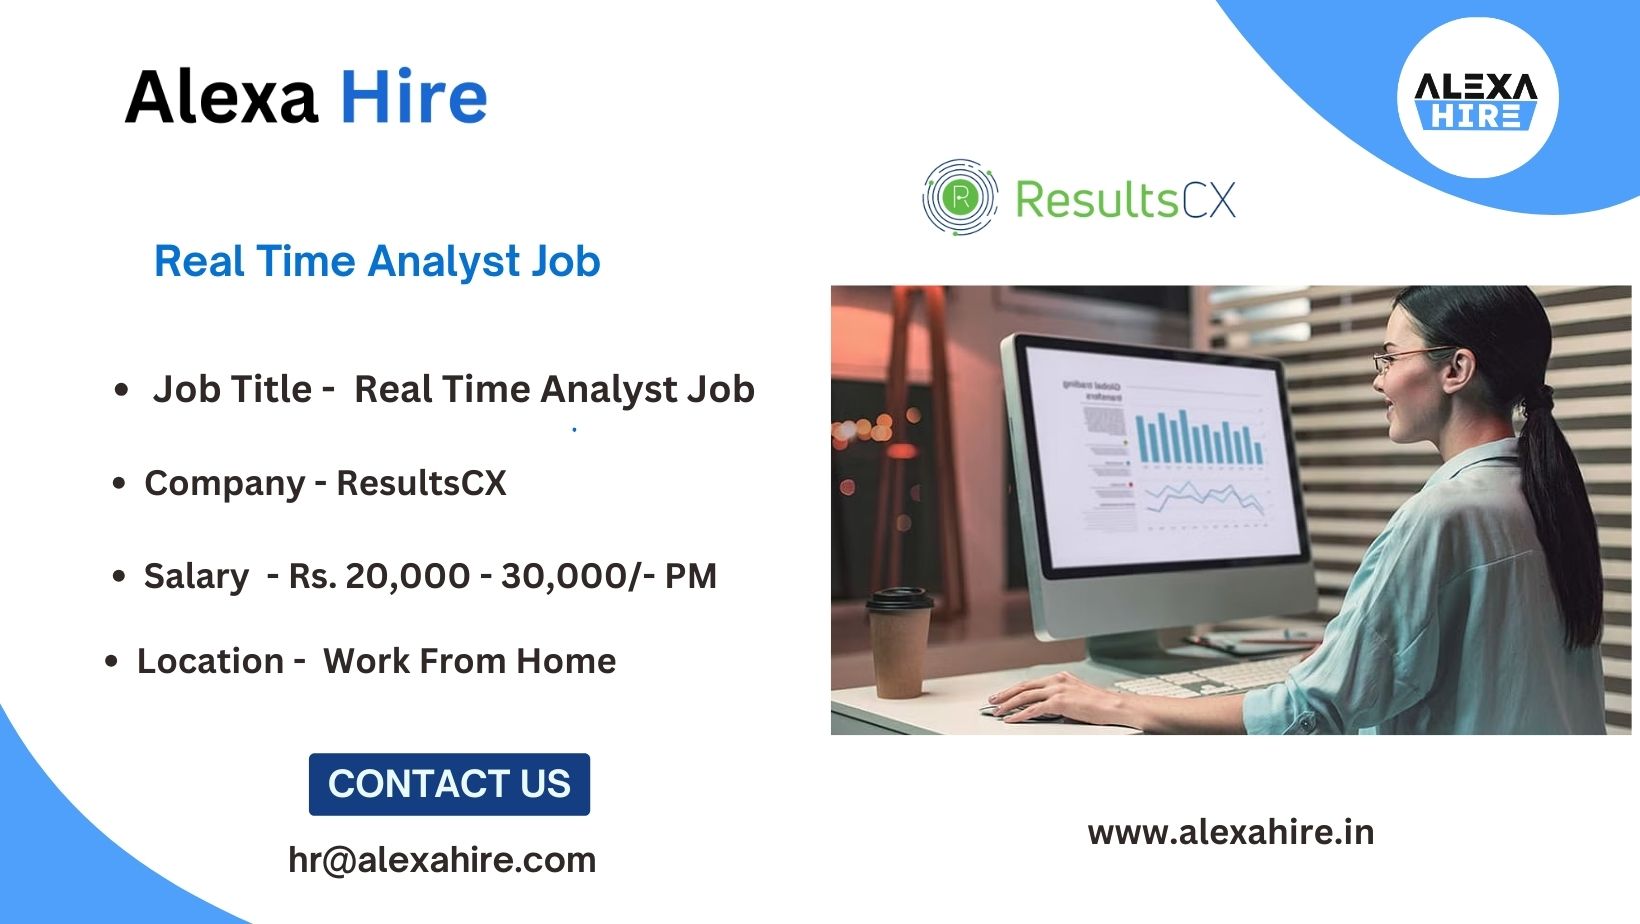 Real Time Analyst Job at Result CX Apply Right Now